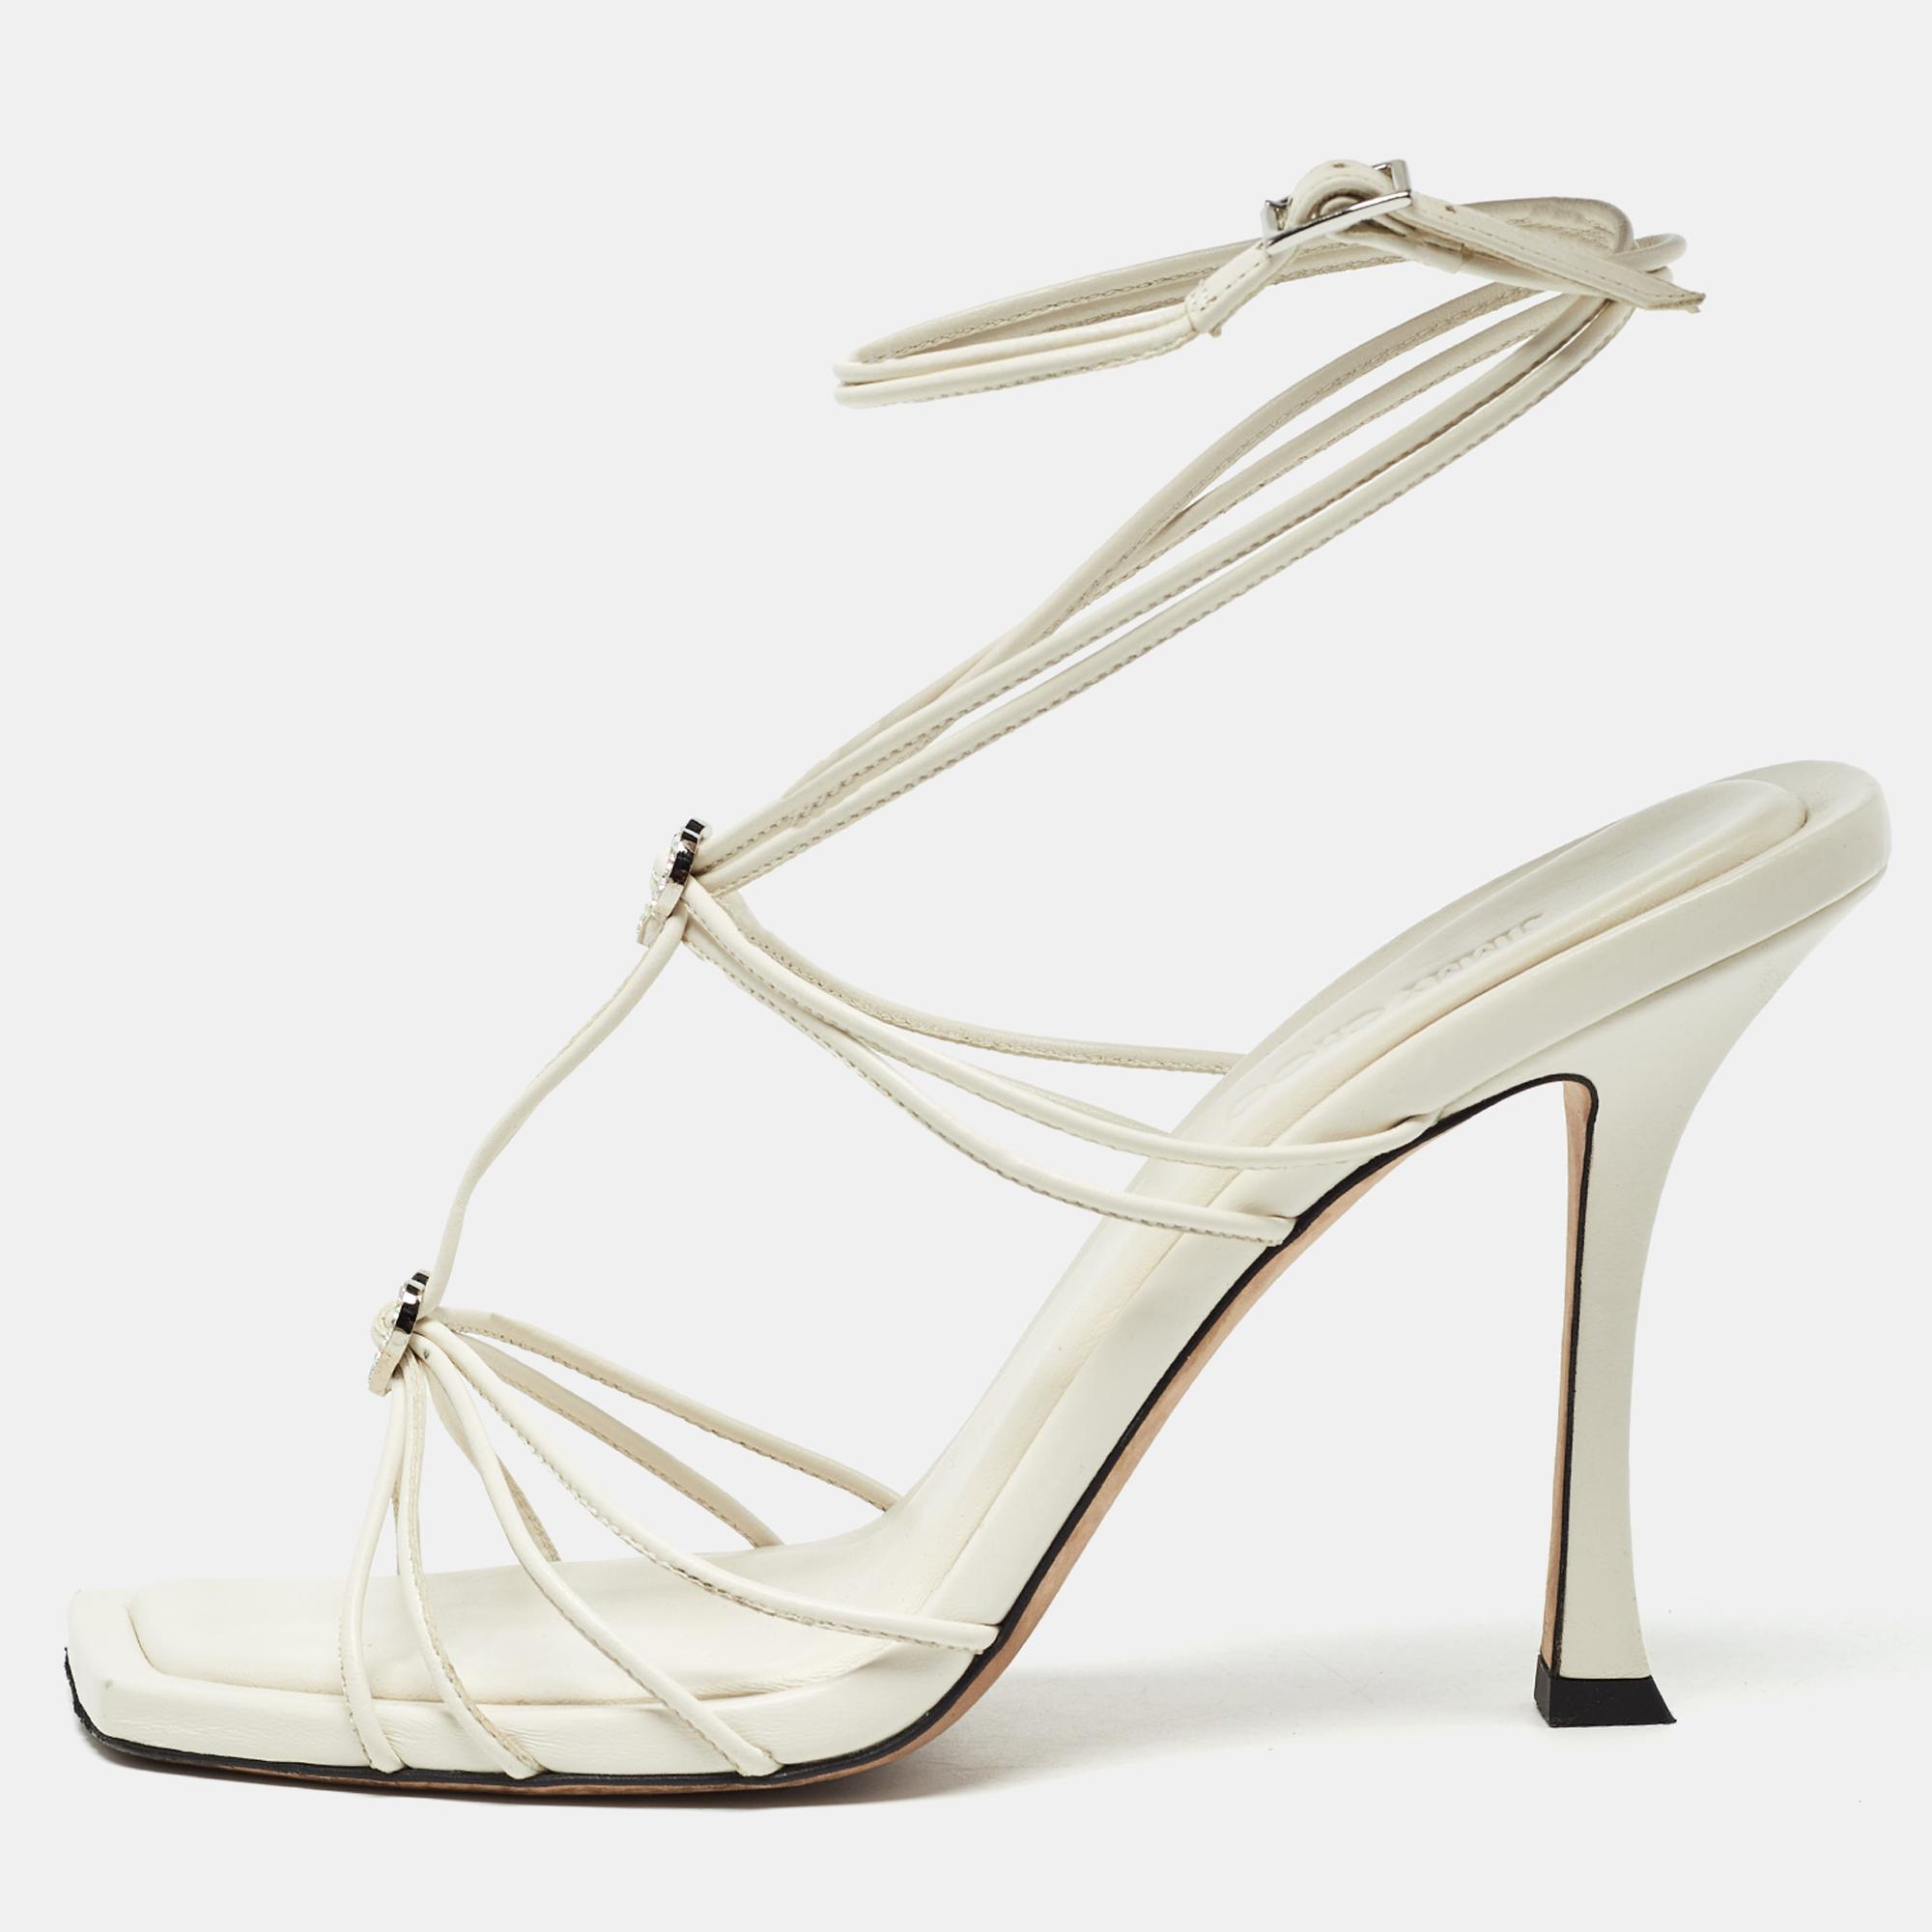 Jimmy choo cream leather strappy sandals size 41